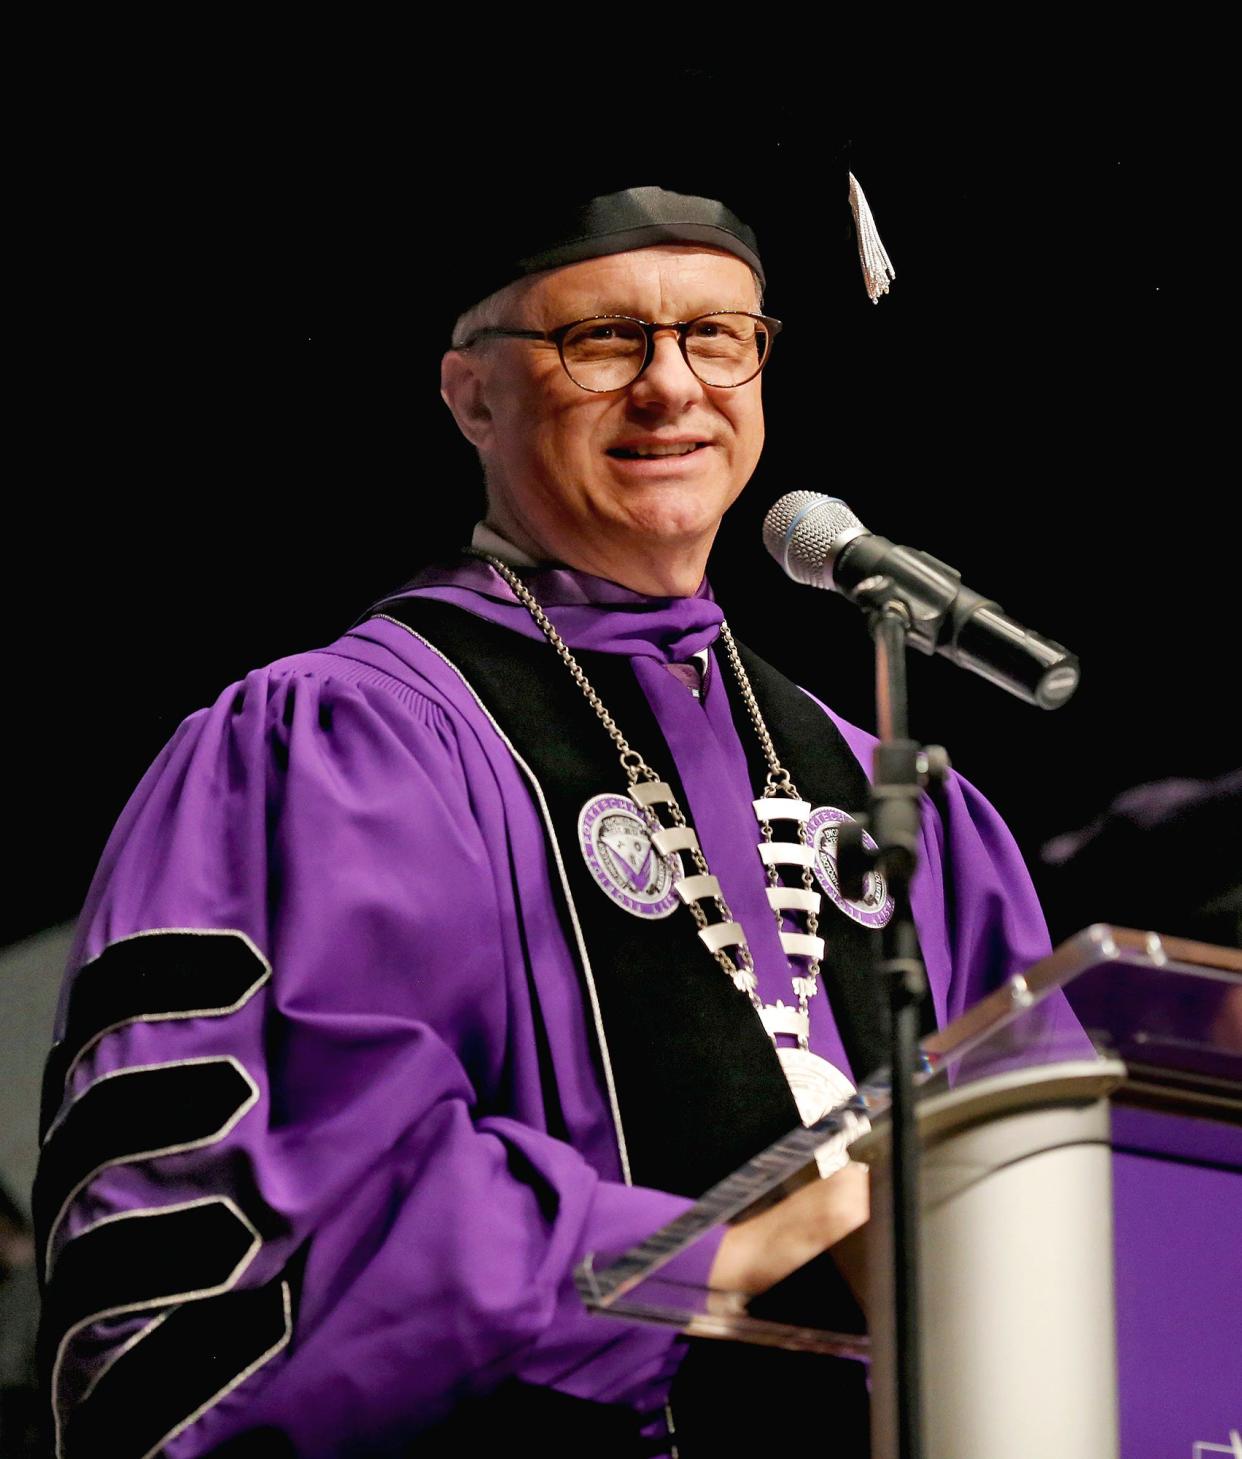 Florida Polytechnic University President Randy Avent, shown in 2018, announced that he will resign next year and take a faculty role following a brief sabbatical.